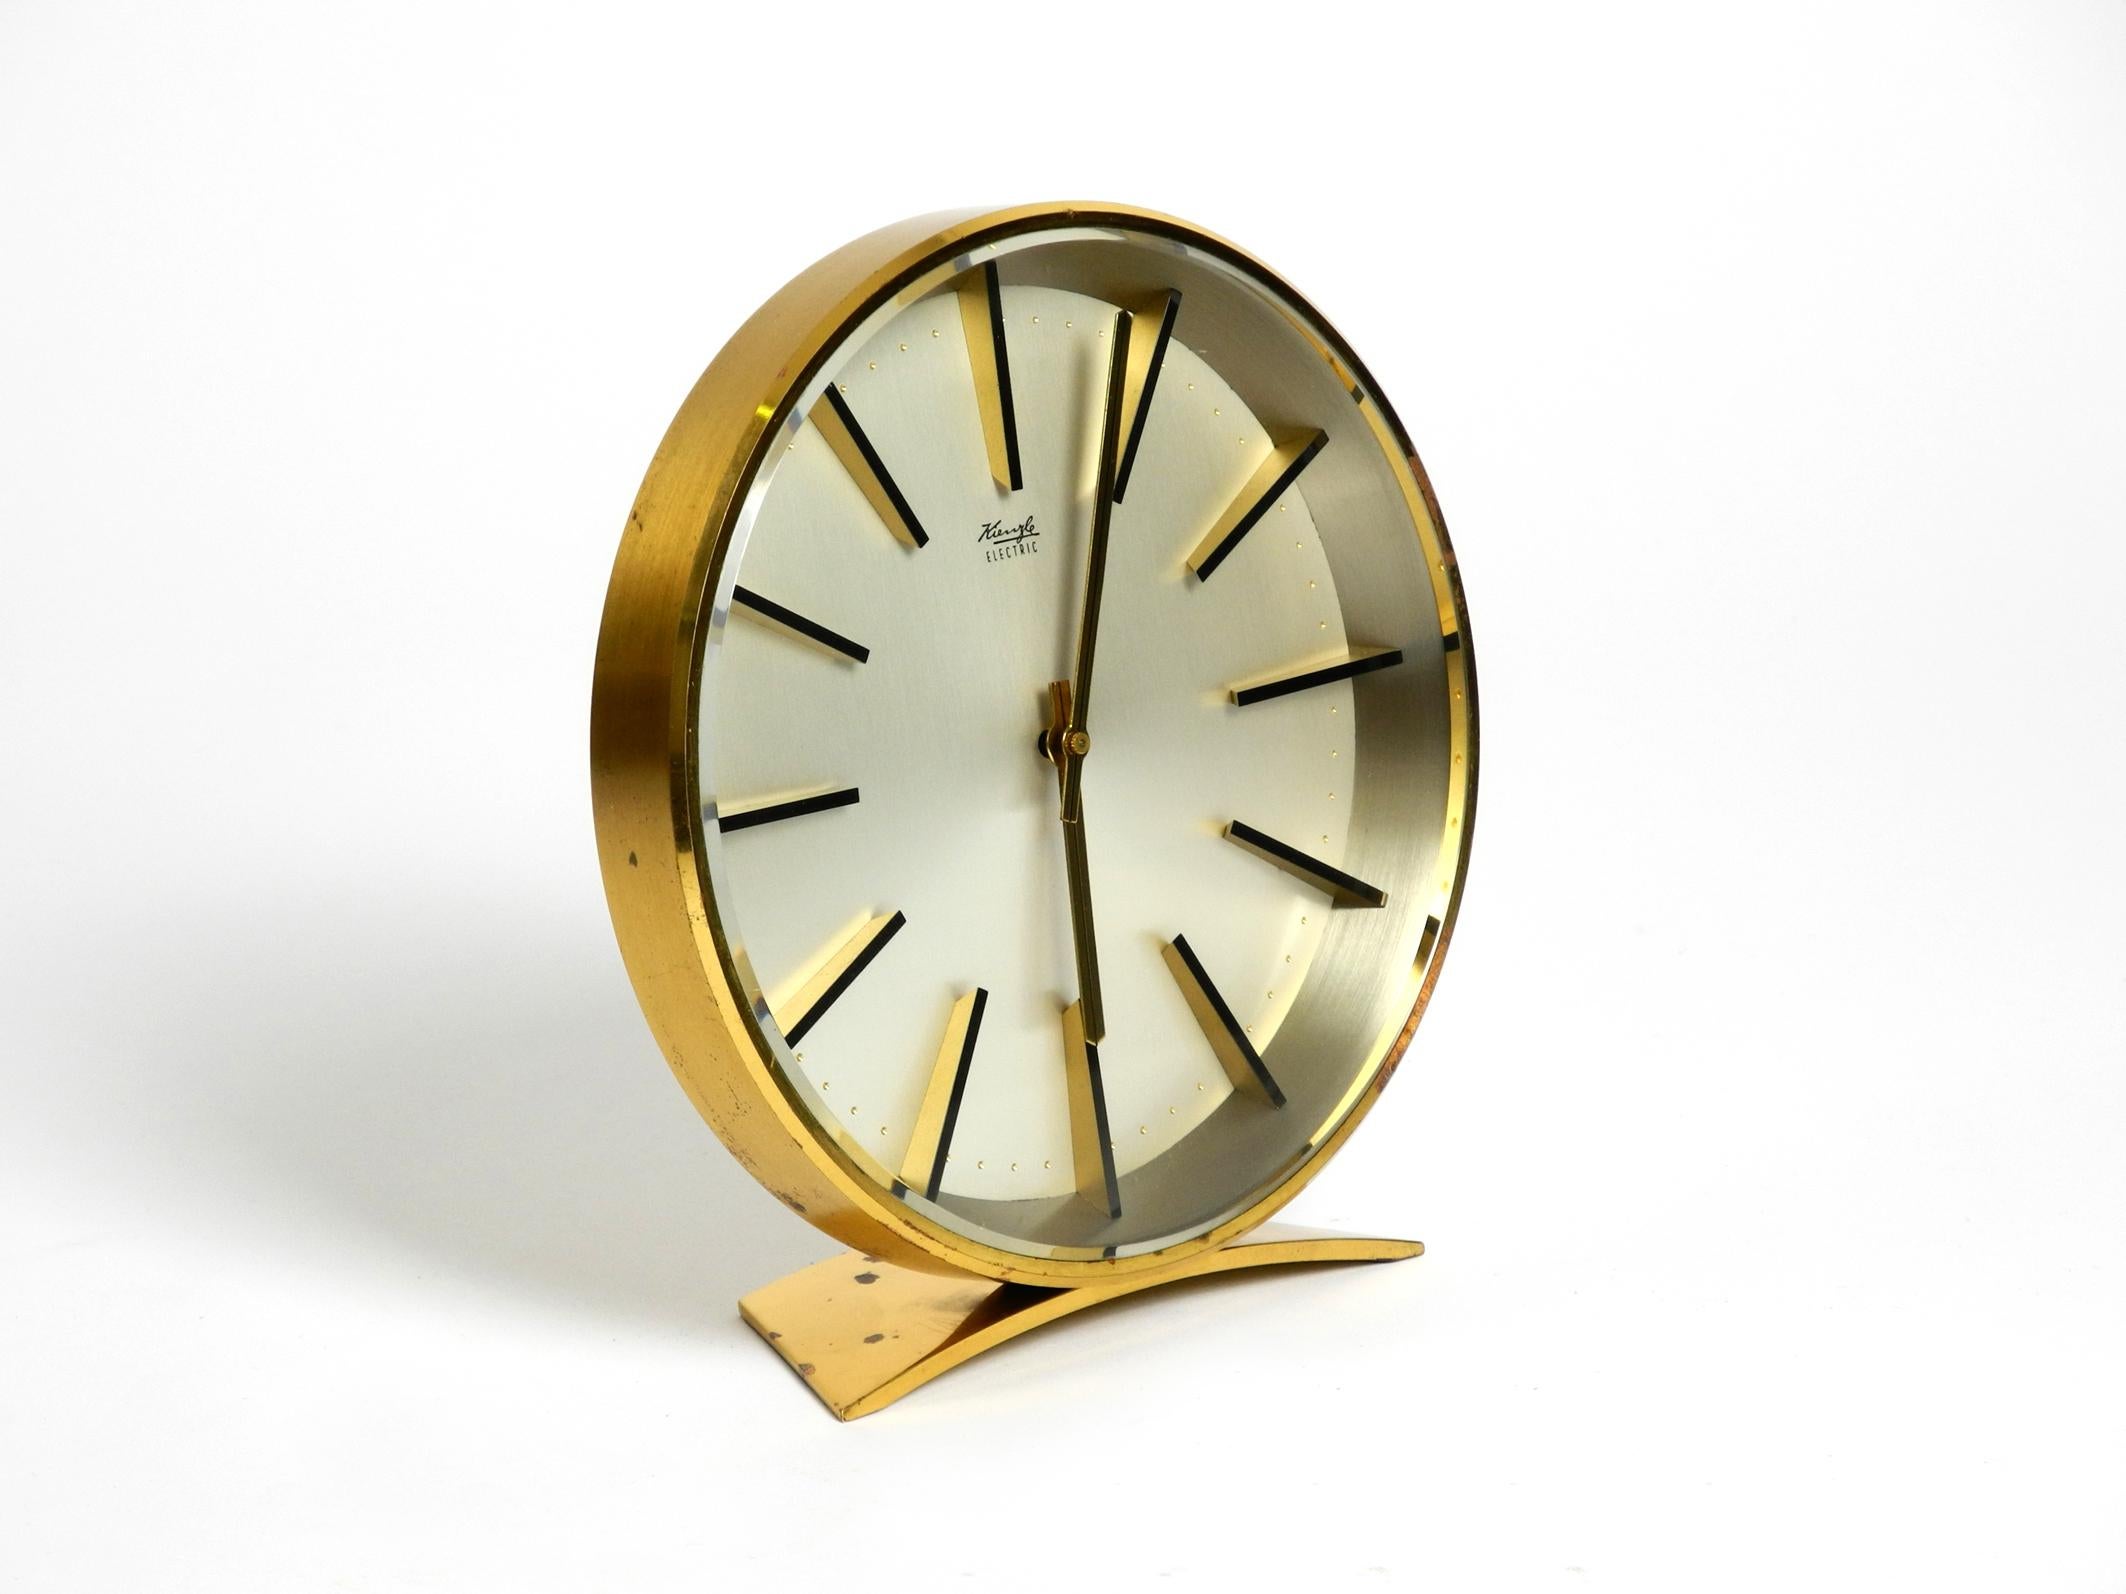 Beautiful original 1960s heavy brass table clock from Kienzle Electric.
Great, very elegant, minimalist 1960s design in good vintage condition.
Battery operated with original drive.
Housing made of solid heavy brass, front made of real glass.
Runs